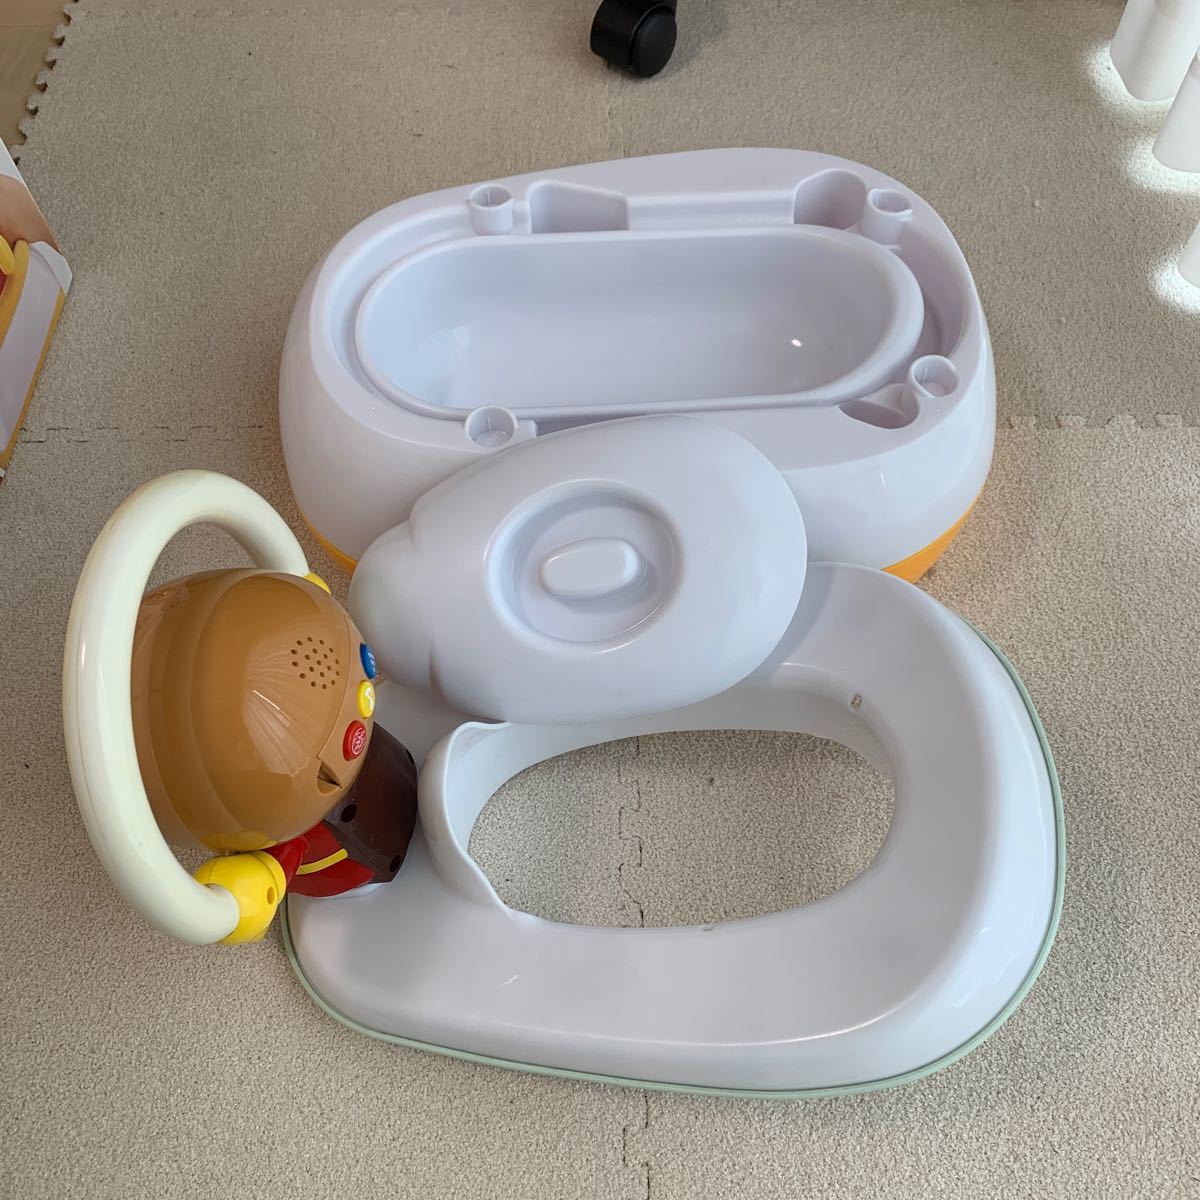 agatsuma Anpanman potty P-01 Pinot chioPINOCCHIO toilet training o maru toilet seat for children for infant baby used with defect 